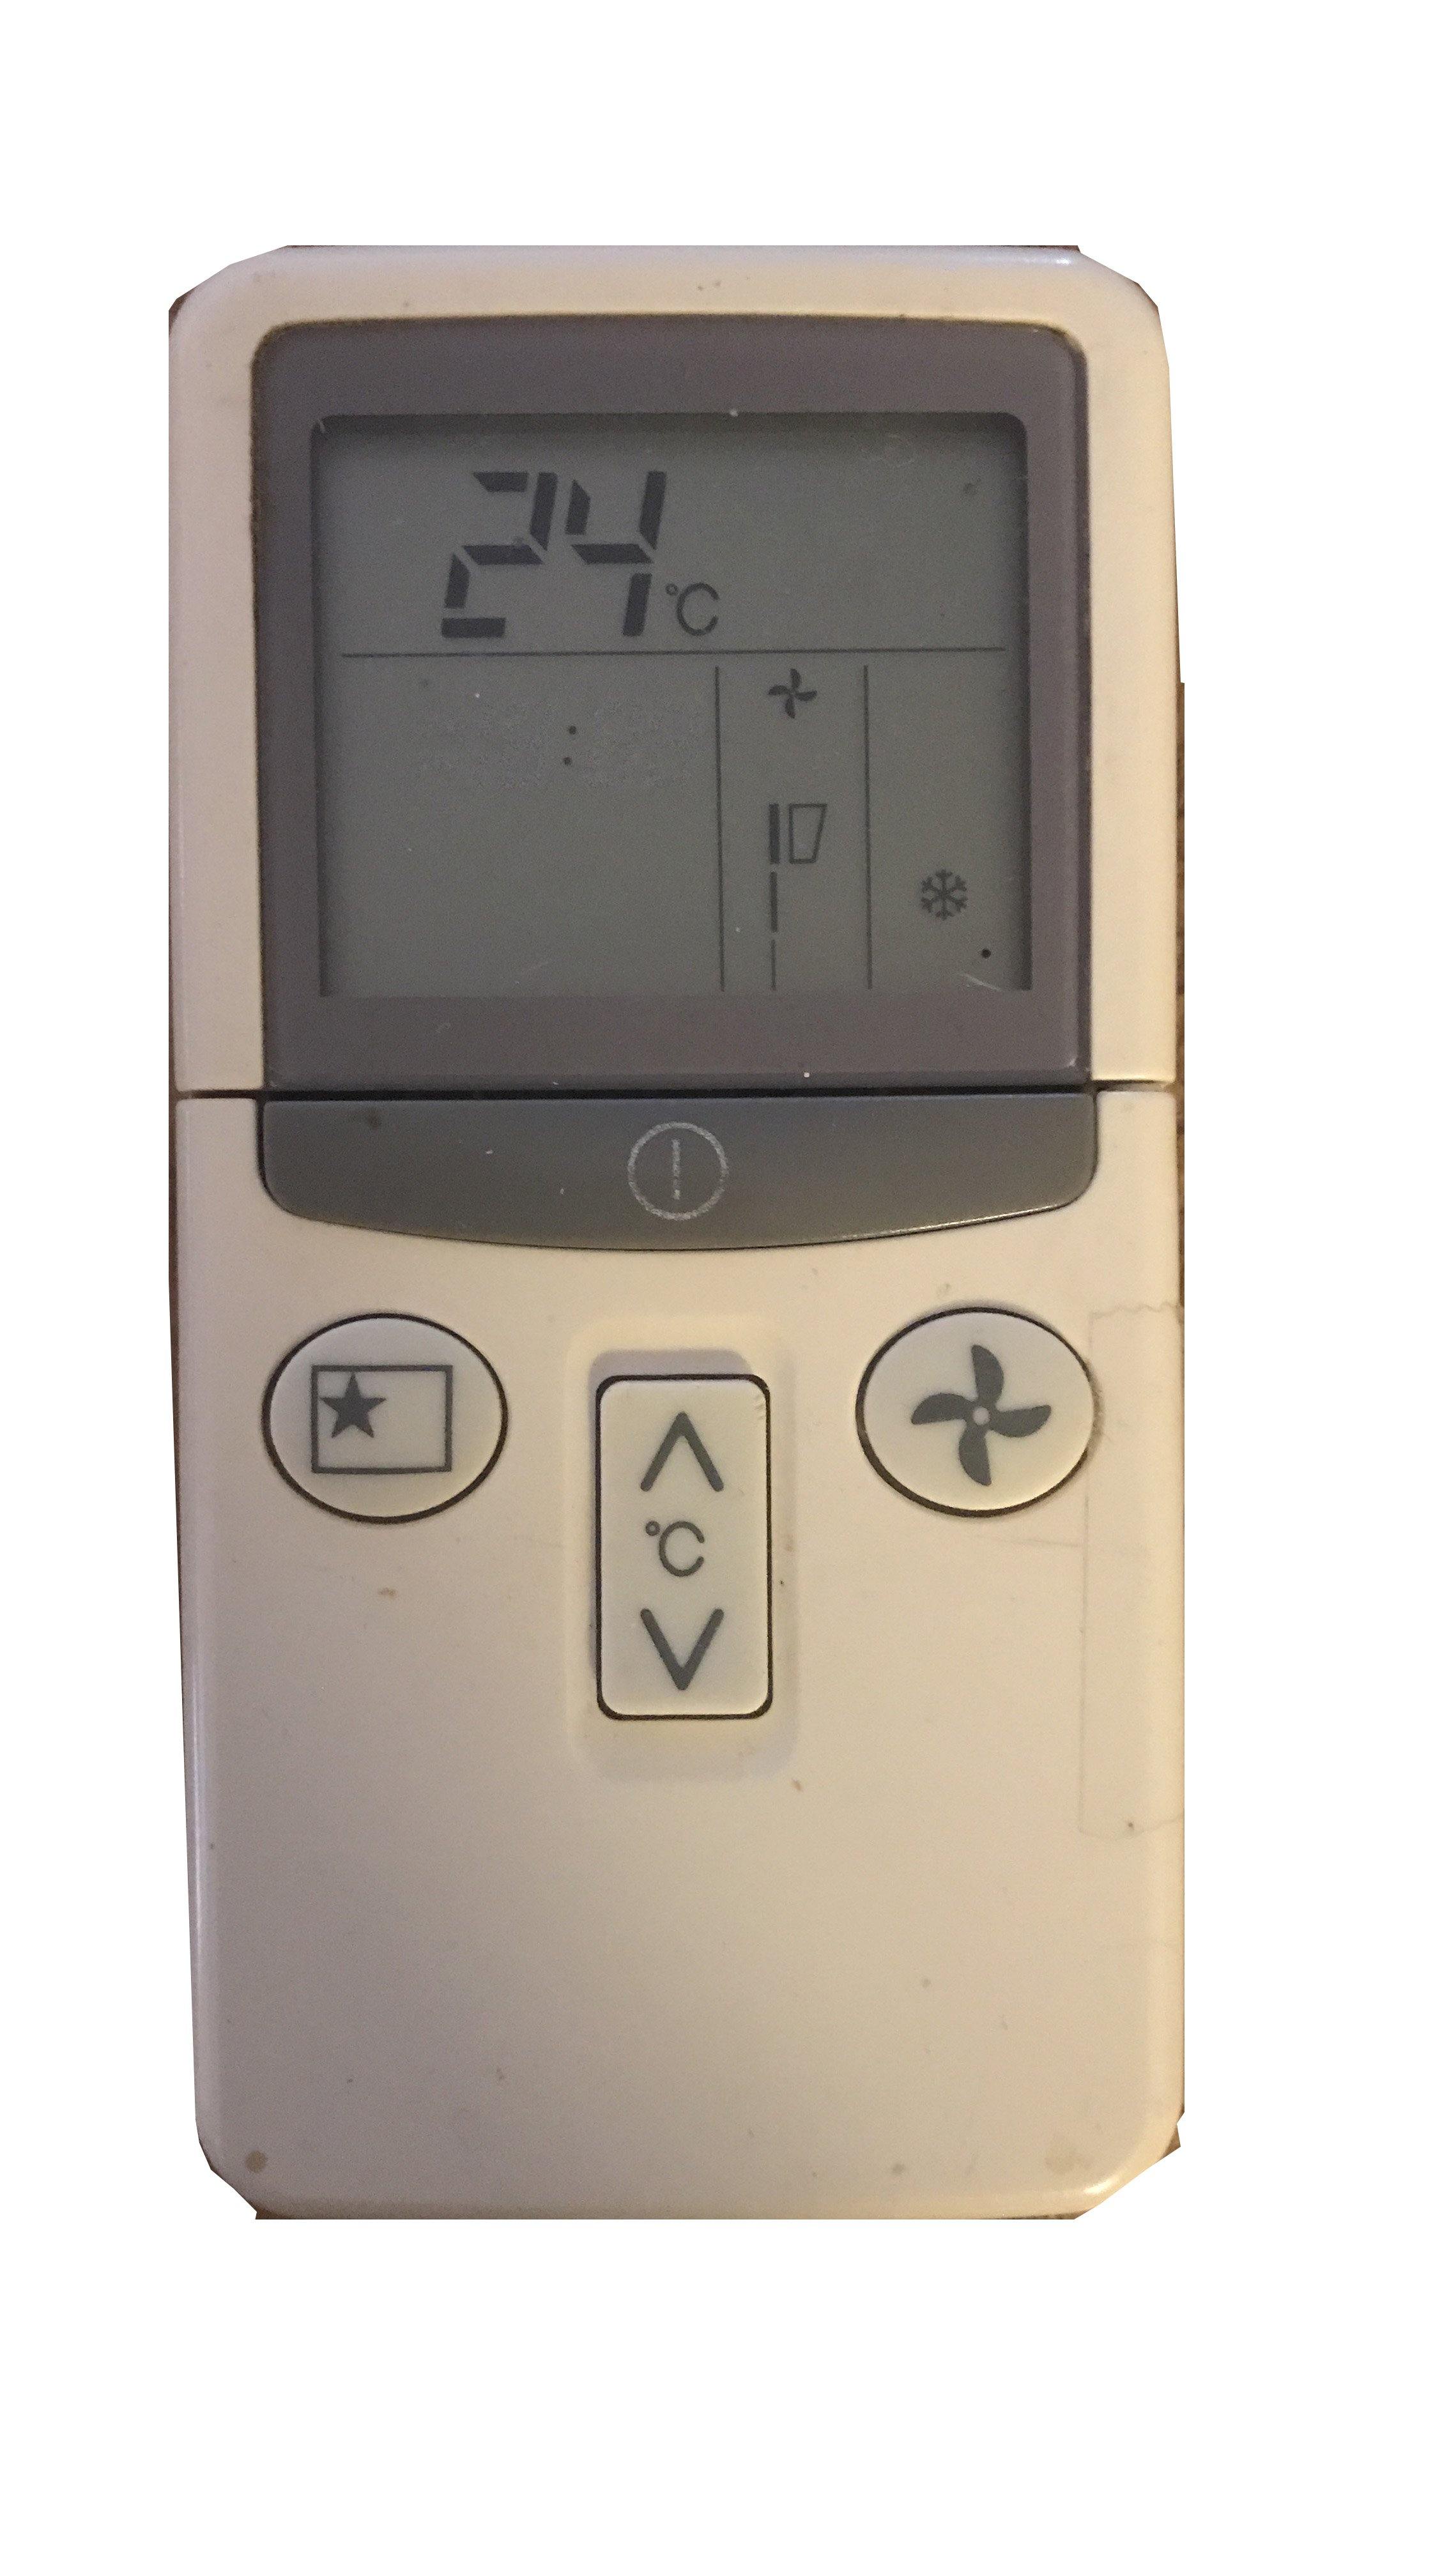 Replacement Air Conditioner Remote for Hitachi RAS Models - China Air Conditioner Remotes :: Cheapest AC Remote Solutions